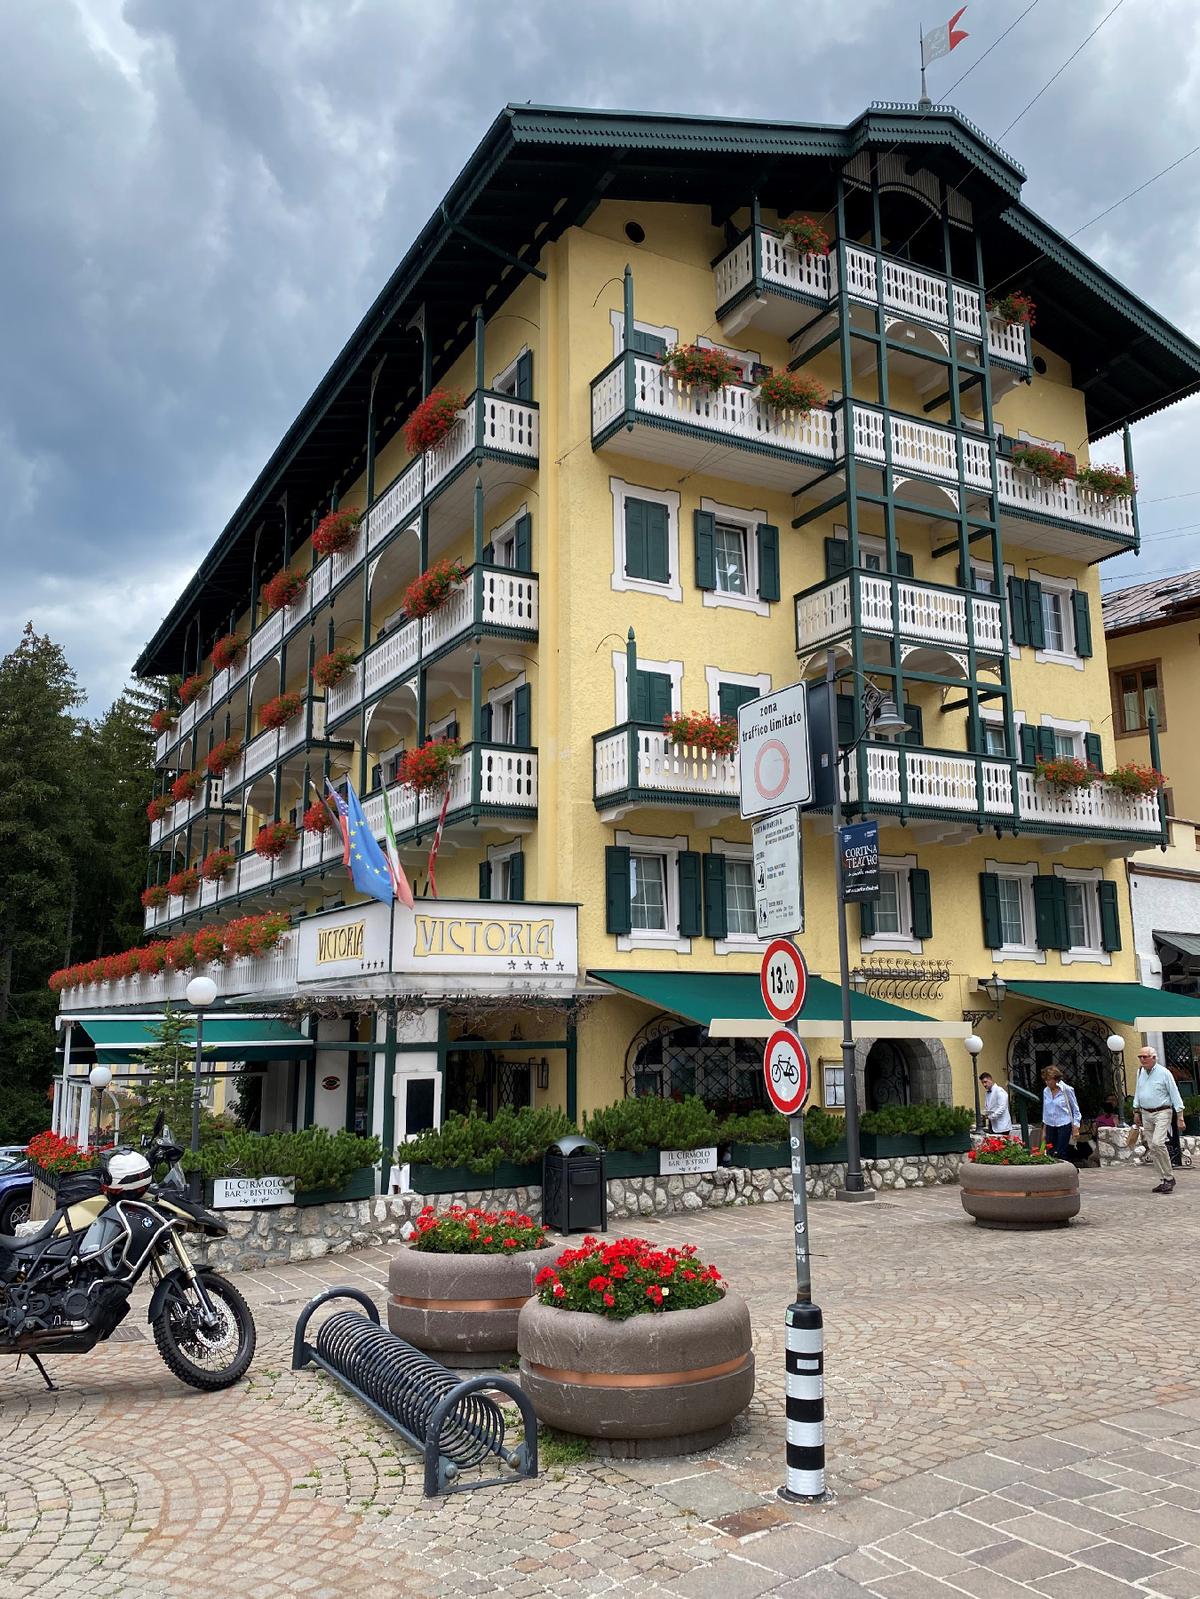 The Park Hotel Victoria in Cortina d’Ampezzo, Belluno, Italy, displays the characteristic charm of European villages. (Courtesy of Margot Black)